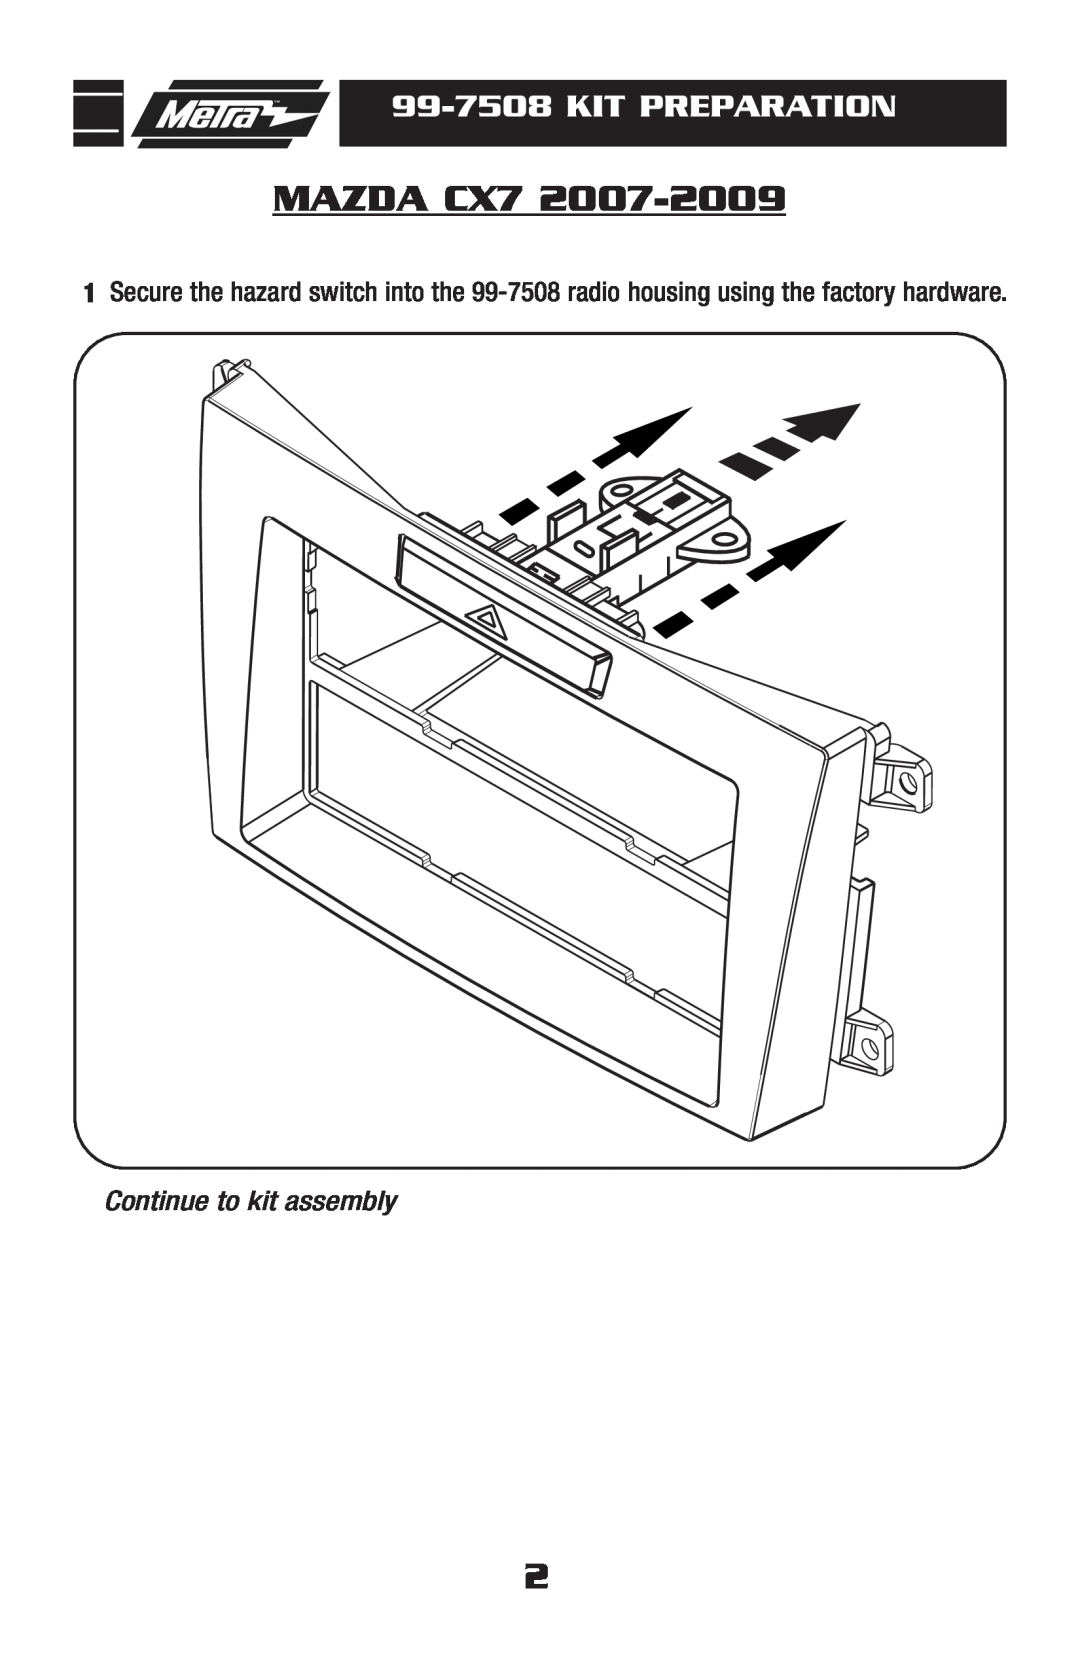 Metra Electronics installation instructions 99-7508KIT PREPARATION, MAZDA CX7, Continue to kit assembly 